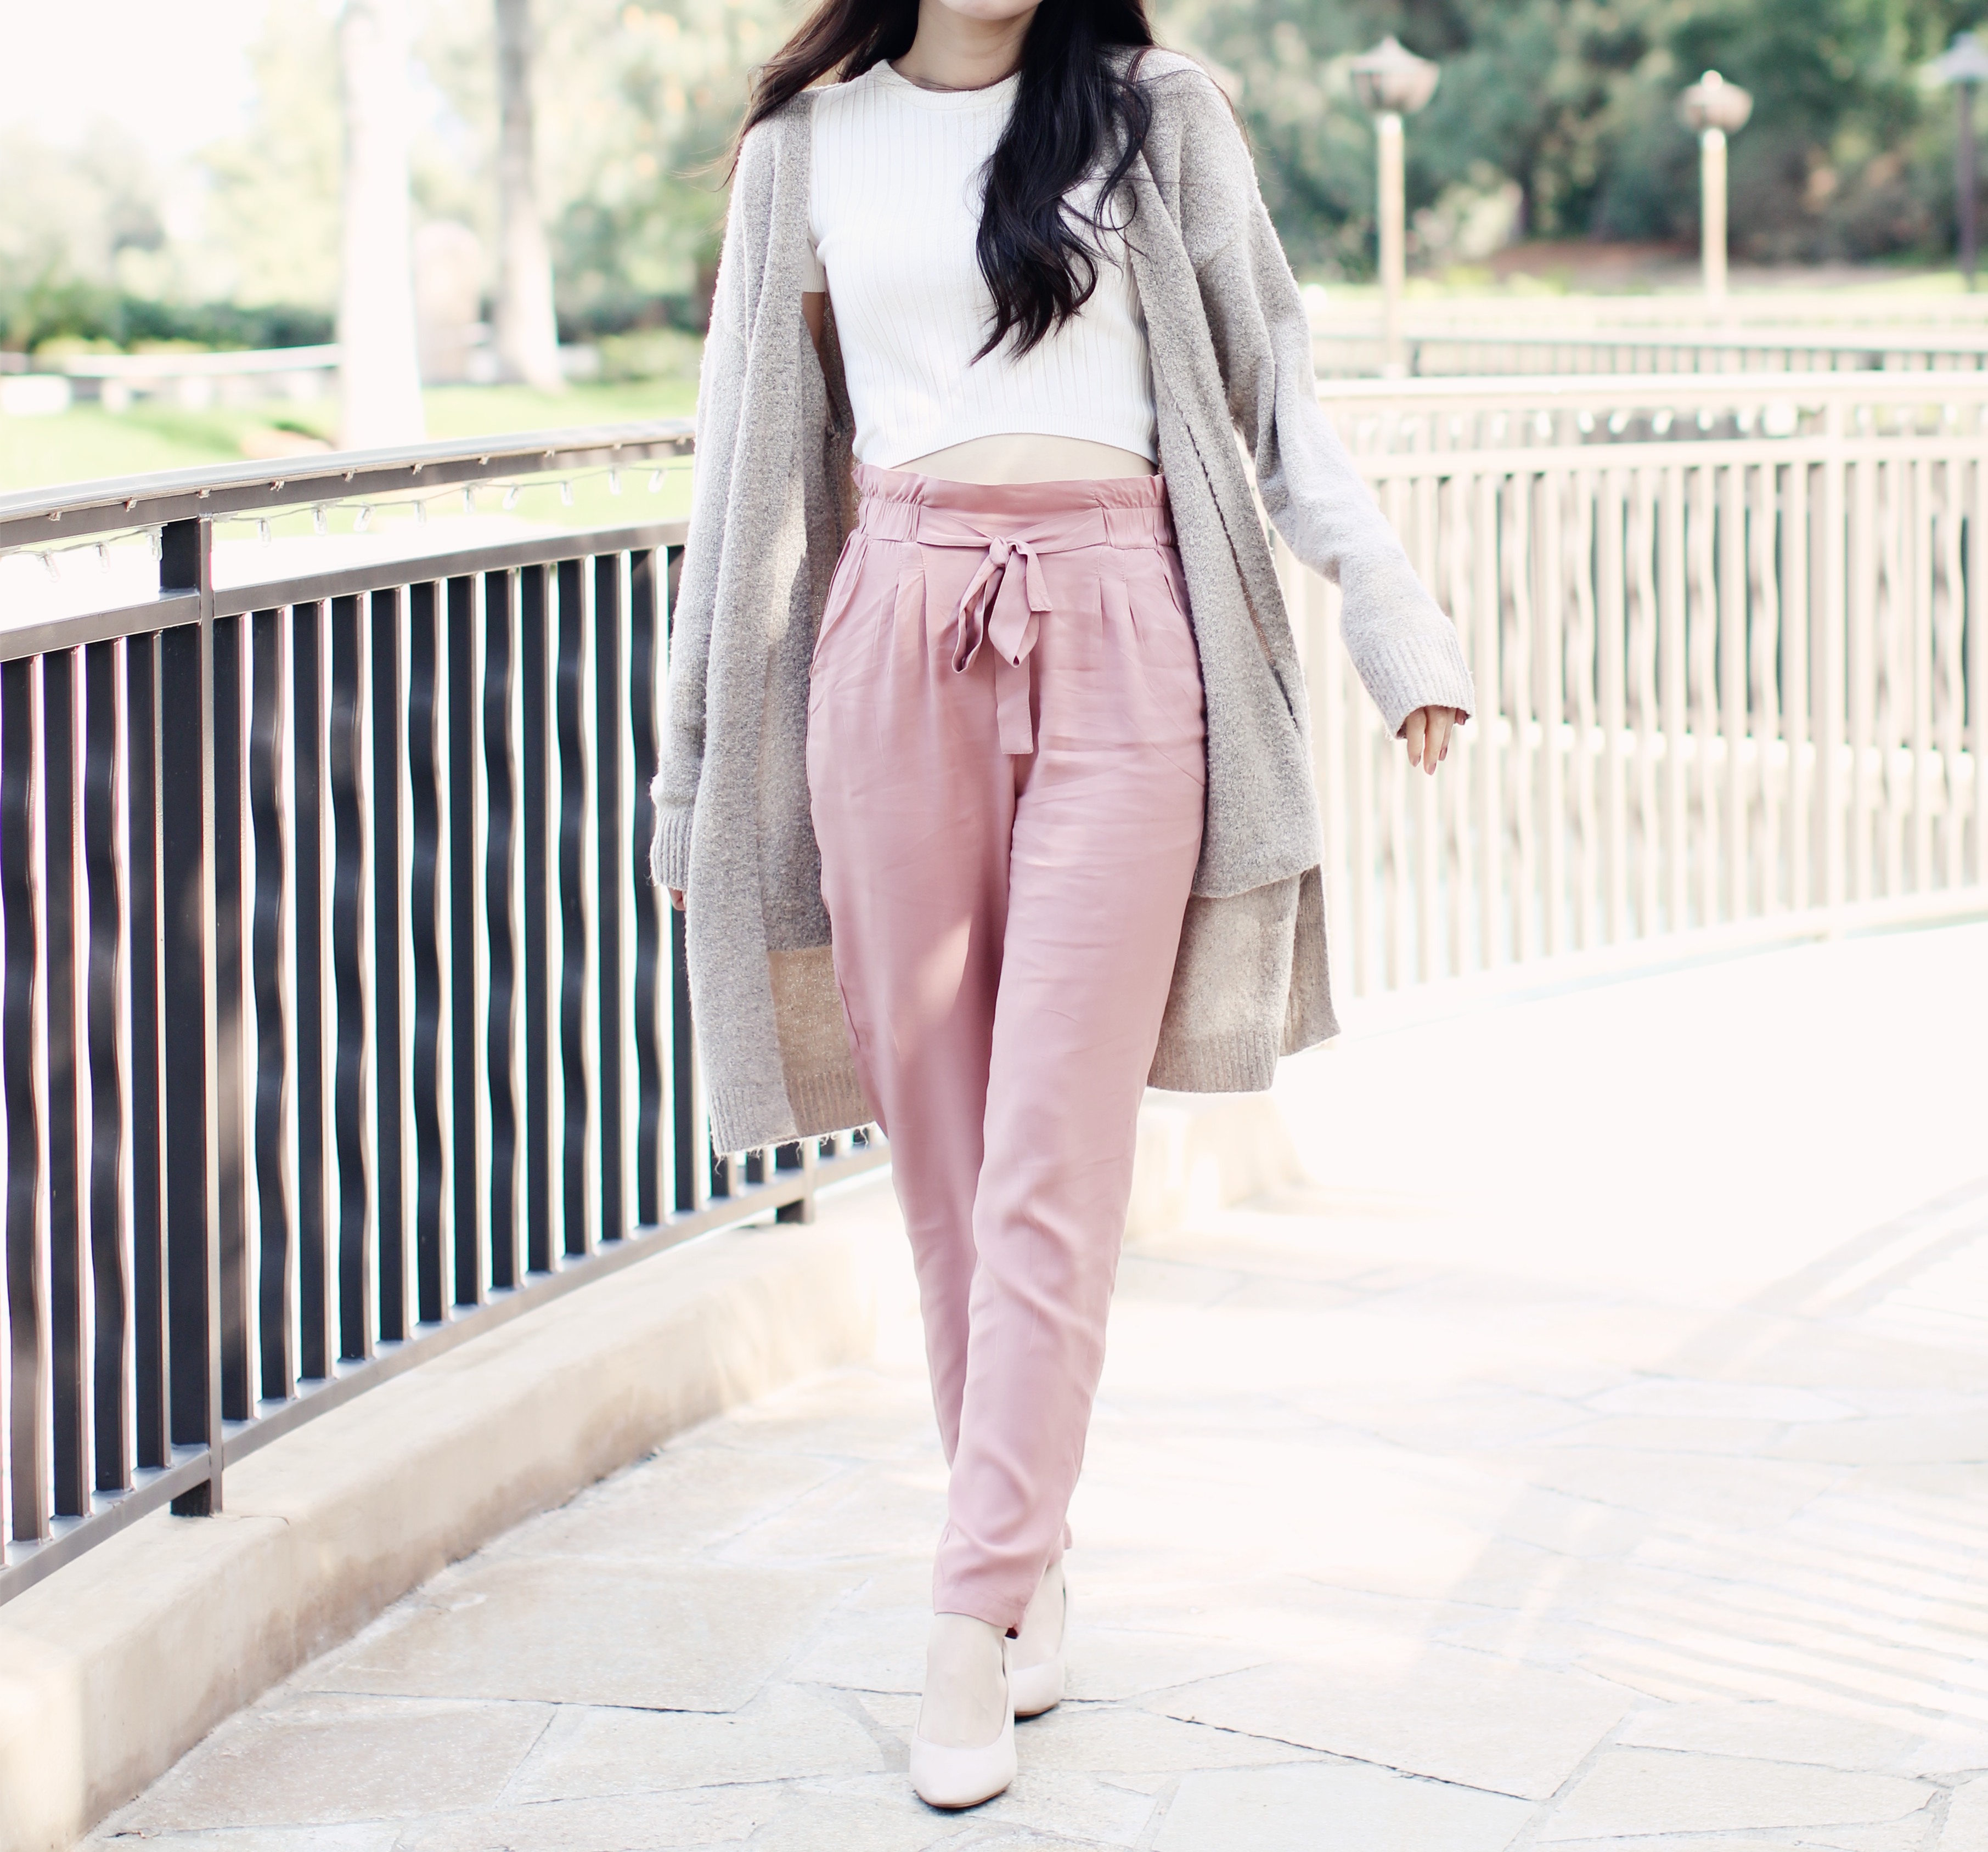 4556-ootd-fashion-style-outfitoftheday-wiwt-streetstyle-forever21-f21xme-anyahindmarch-ninewest-trousers-elizabeeetht-clothestoyouuu